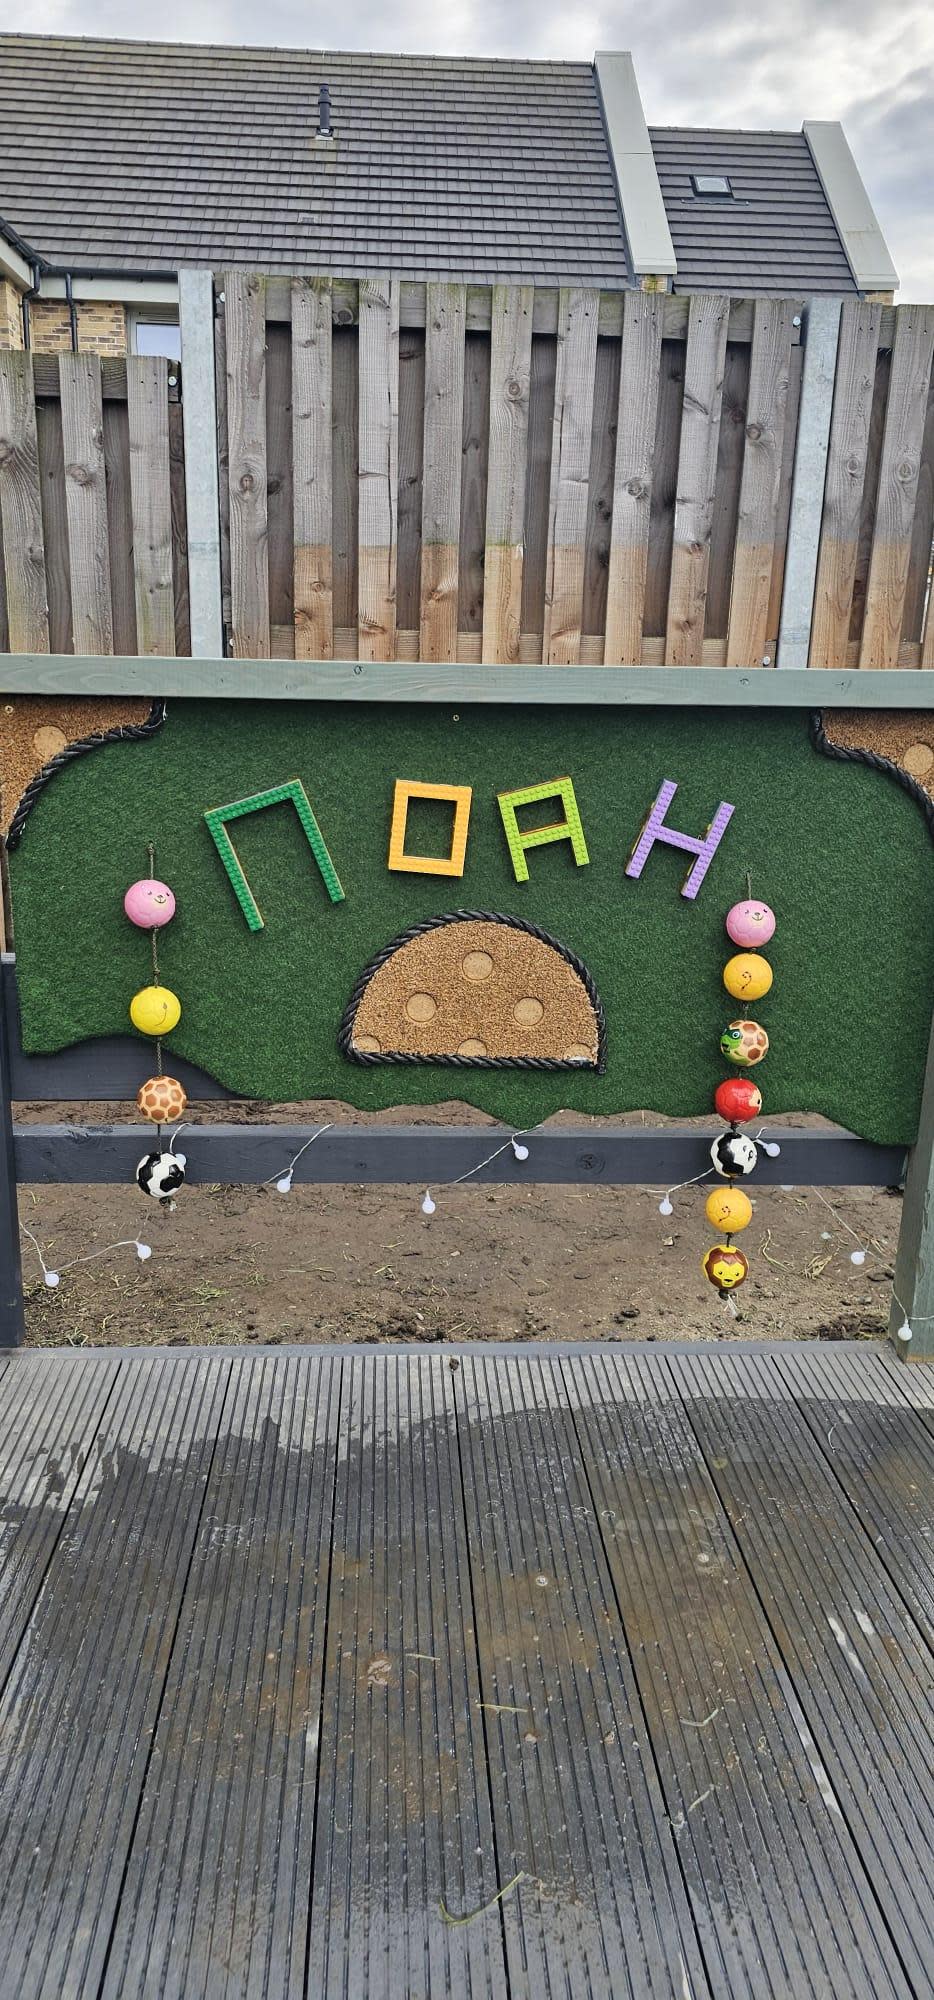 Glasgow Times: Noah can enjoy the space at his home